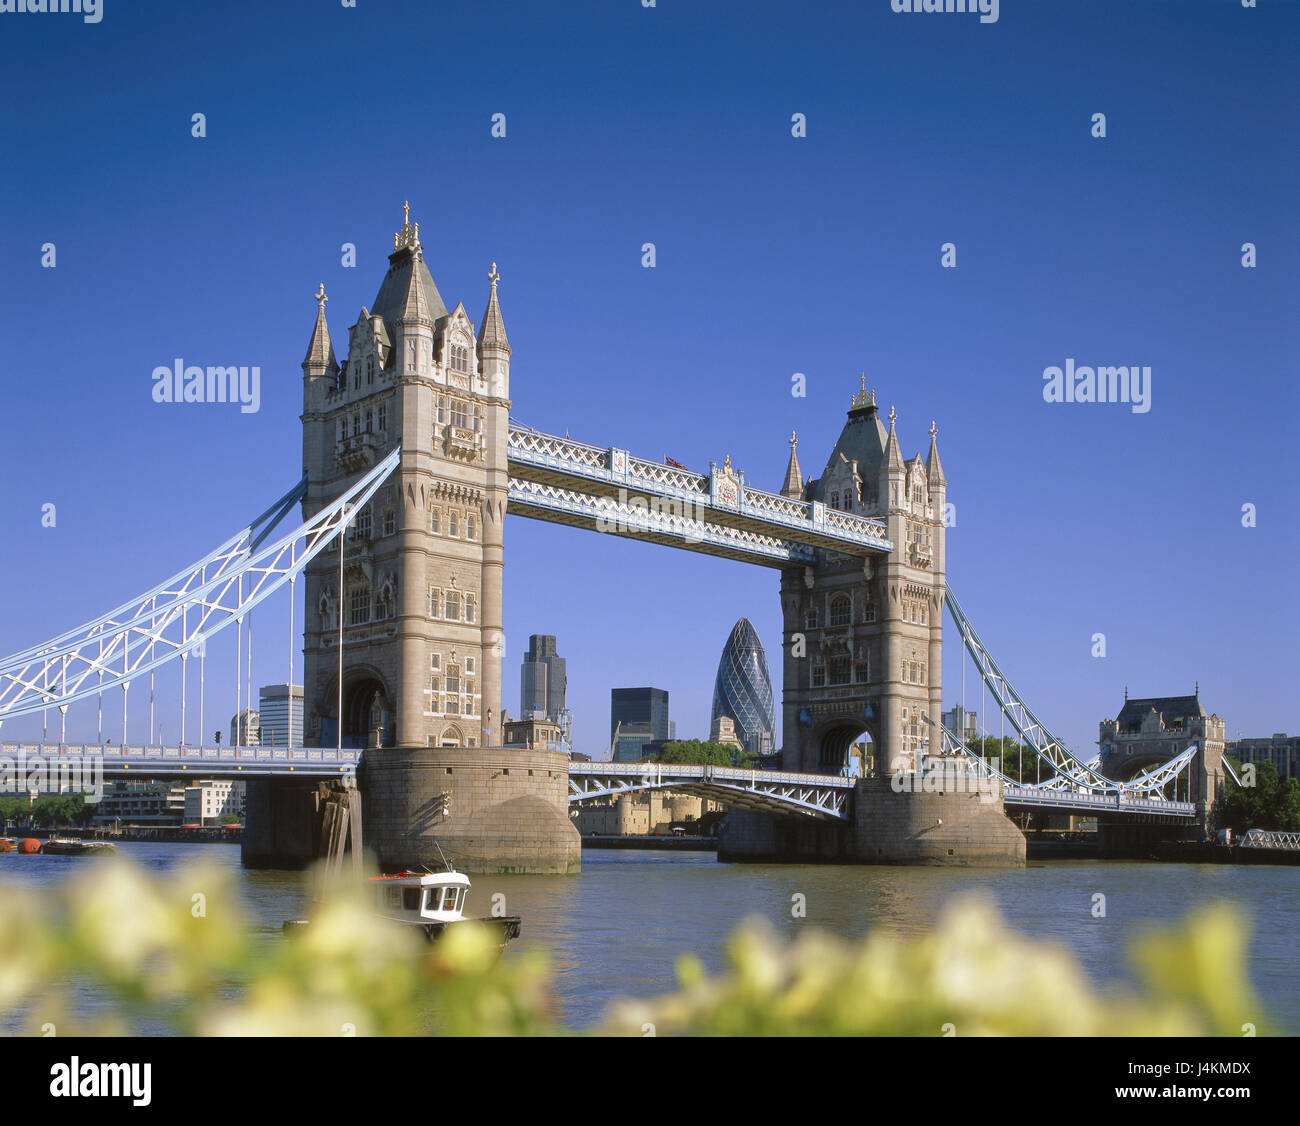 Great Britain, London, Tower Bridge, the Thames Europe, England, town, city, capital, architecture, bridge, balance bridge, Wippbrücke, builds in 1886 - in 1894, architect sir Horace Jones, place of interest, landmark, construction, masonry, steel, Long 286.5 m, river, Thames, background Swiss Re Tower Stock Photo